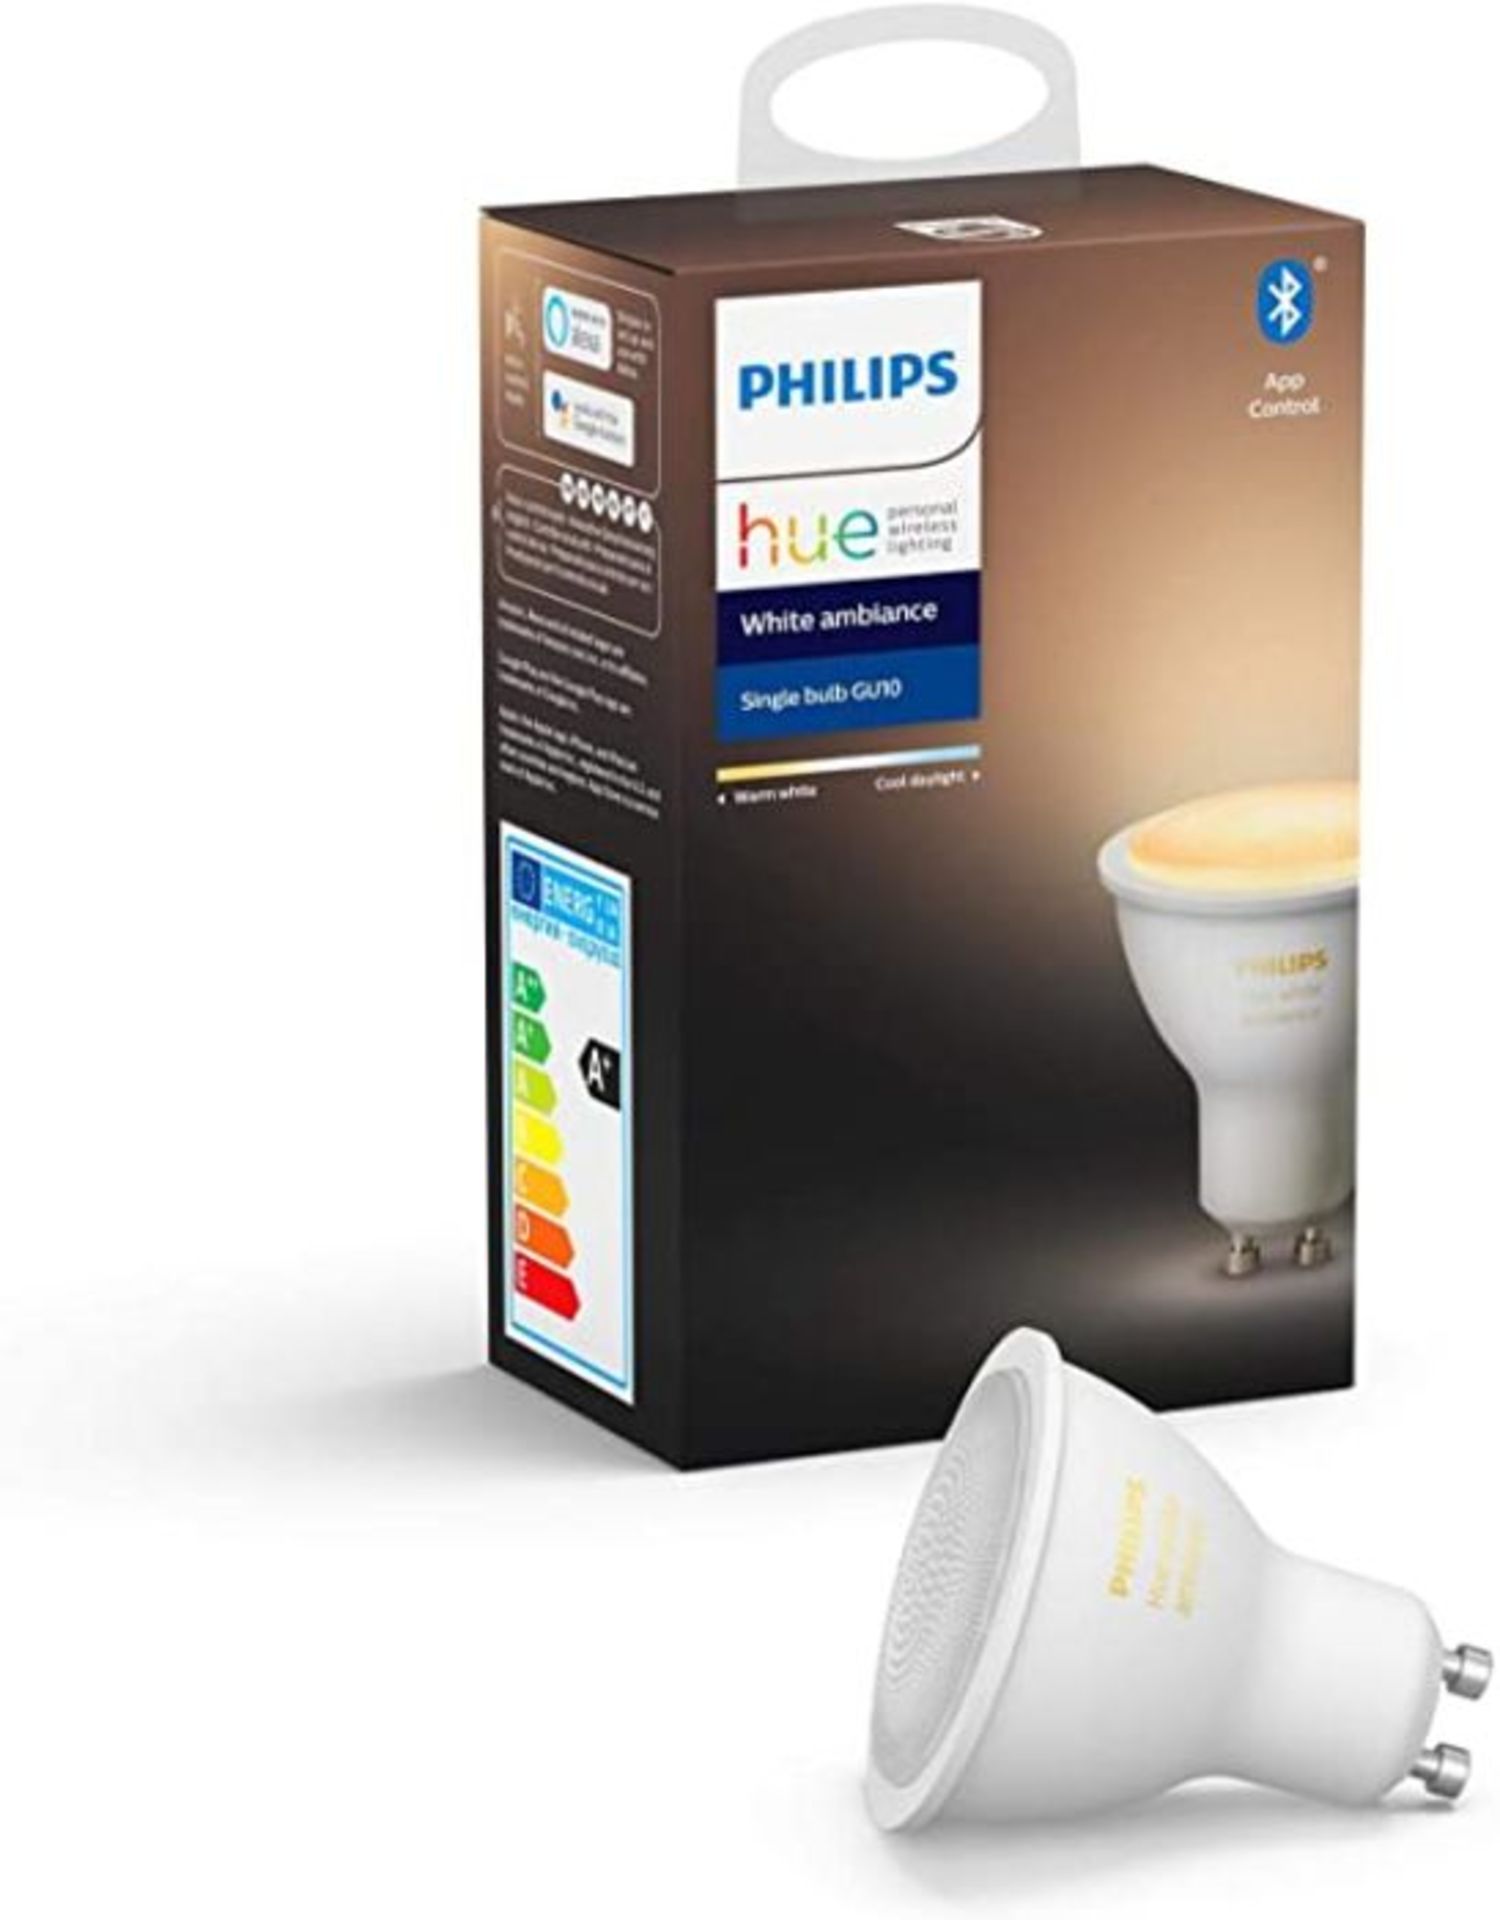 Philips Hue White Ambiance Single Smart Spotlight LED [GU10 Spot] with Bluetooth. Works with Alexa